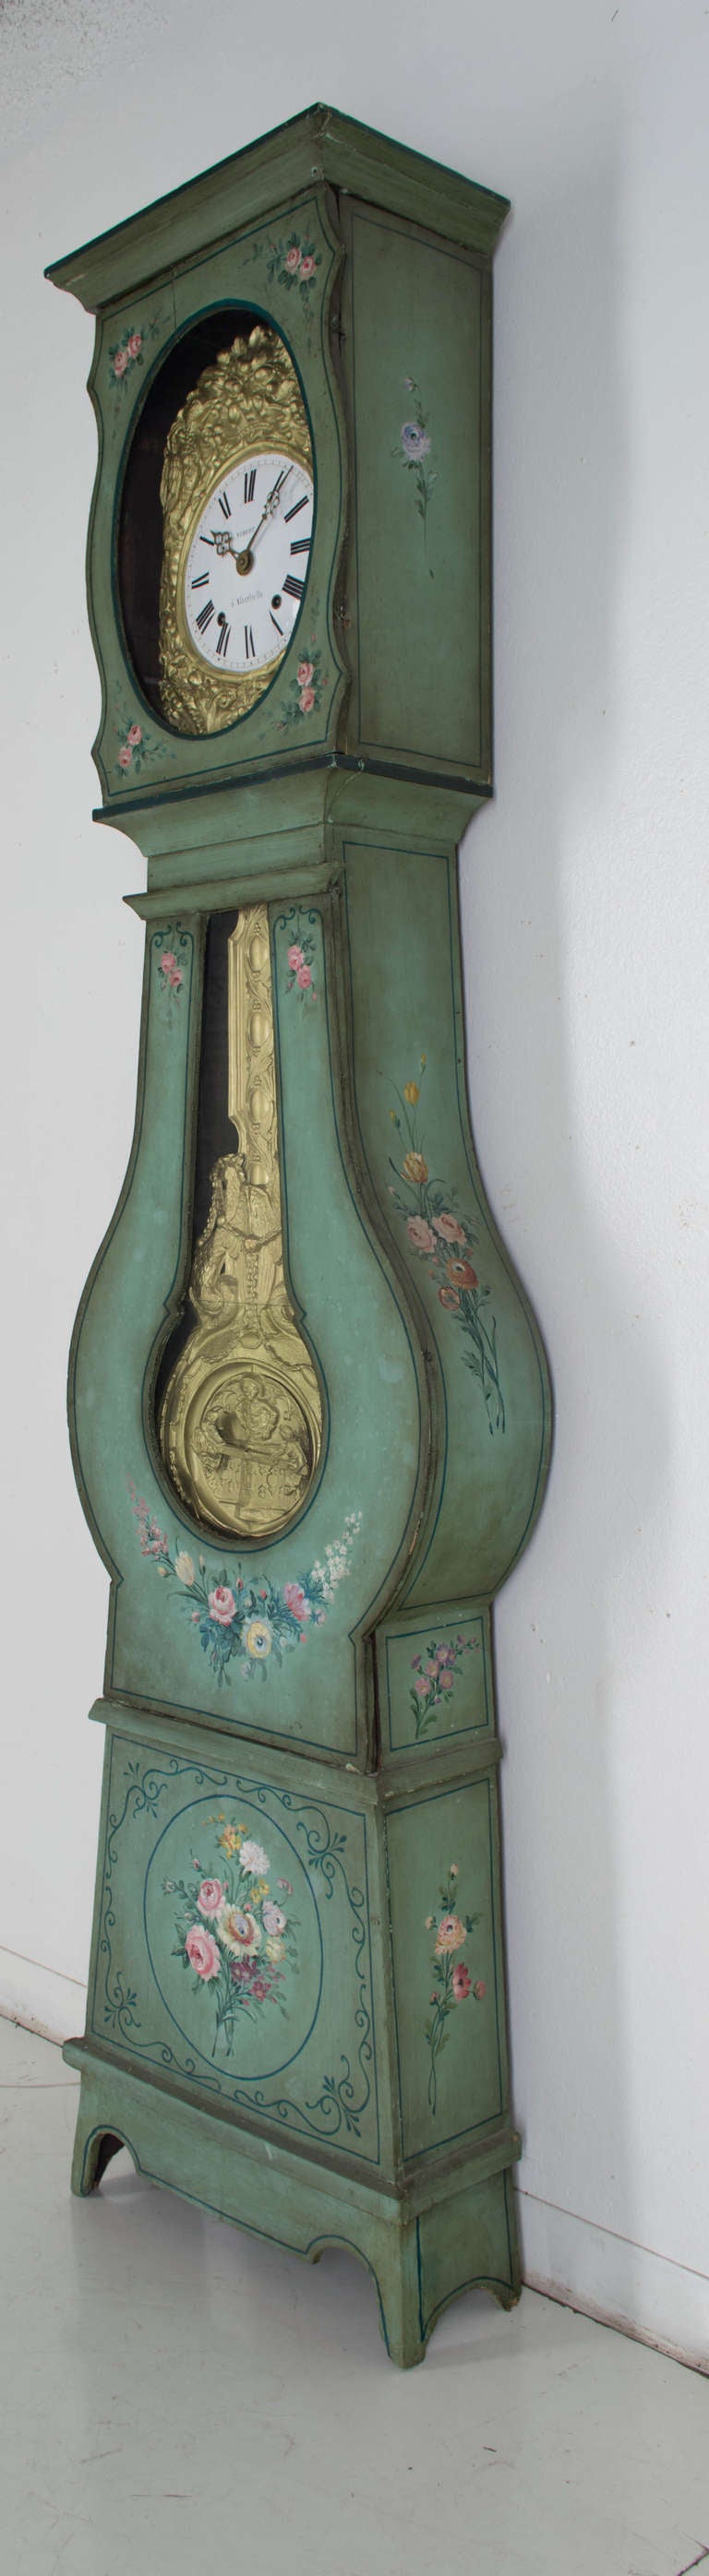 An original painted tall case clock on a light green background with bouquets of flowers painted on three sides, with its original Morbier movement, signed Vibert a Albertville (Alps province), seven day clock in working condition, with an automated